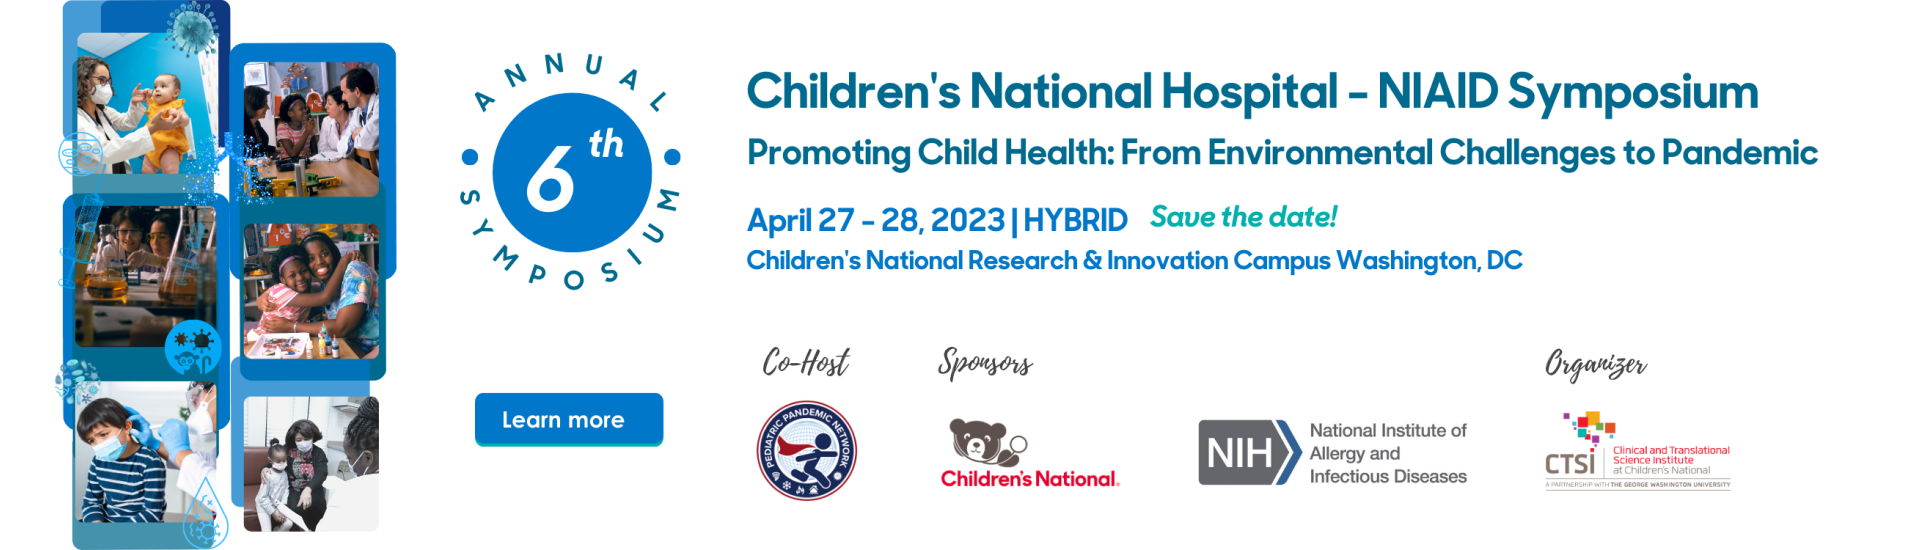 NIAID SYMPOSIUM April 27-28, 2023 | Hybrid - promoting child health: from environmental challenges to pandemic